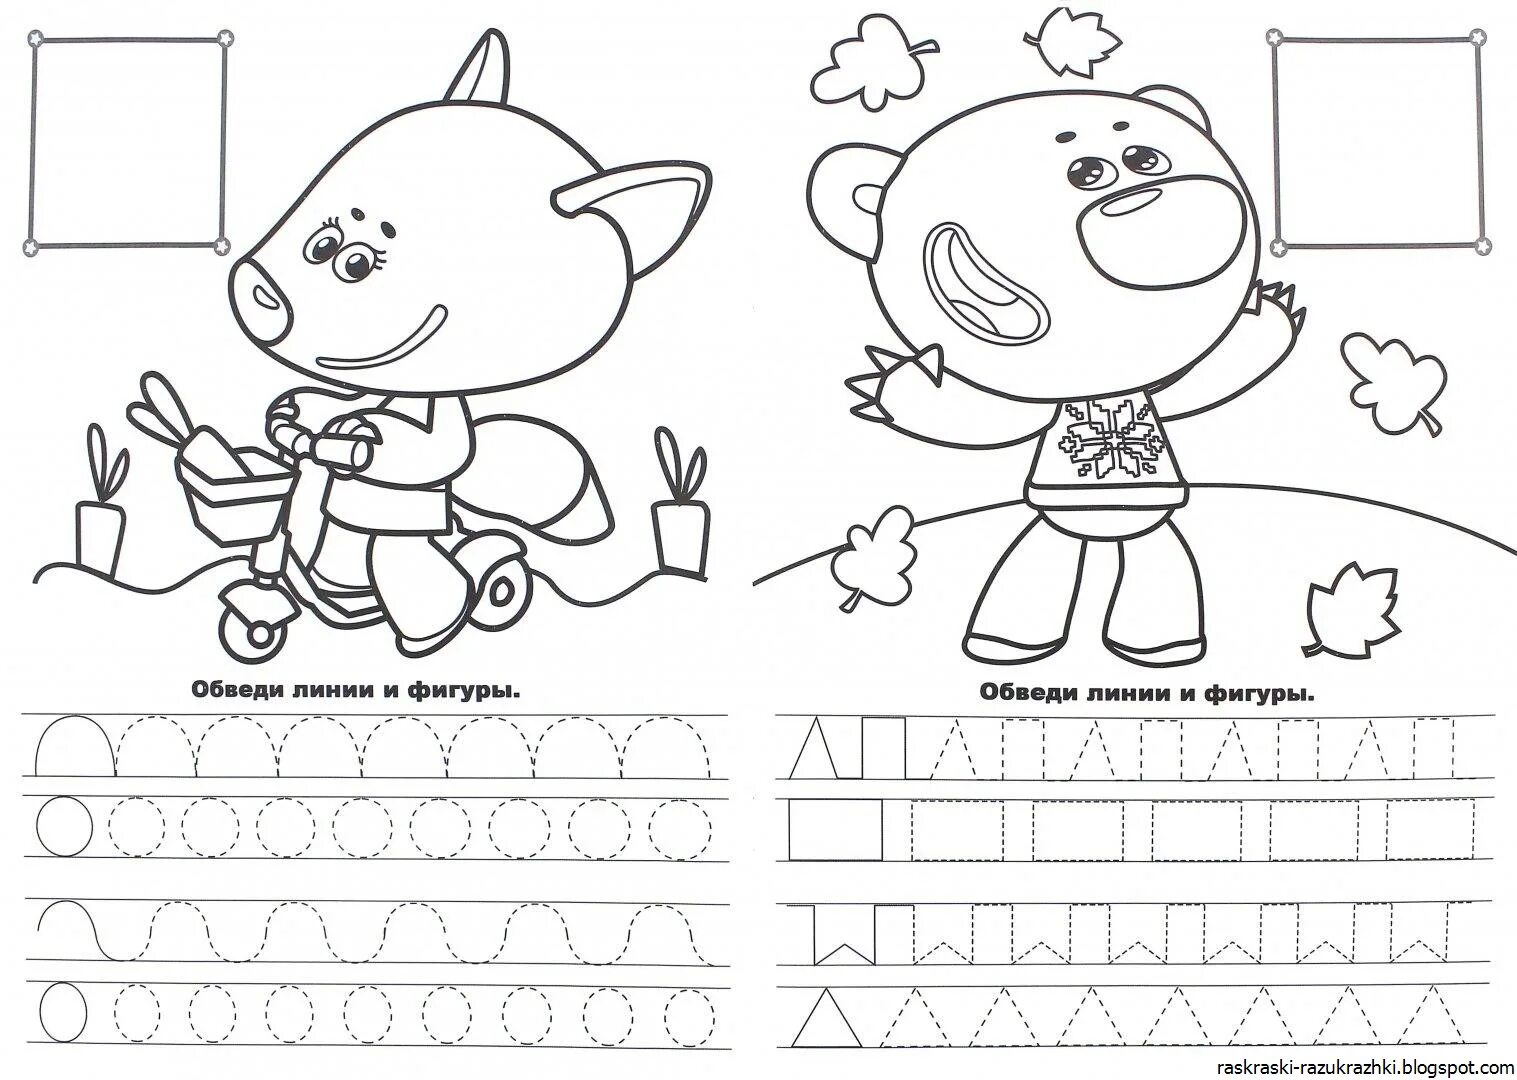 Color-creative prescription coloring page for children 4-5 years old